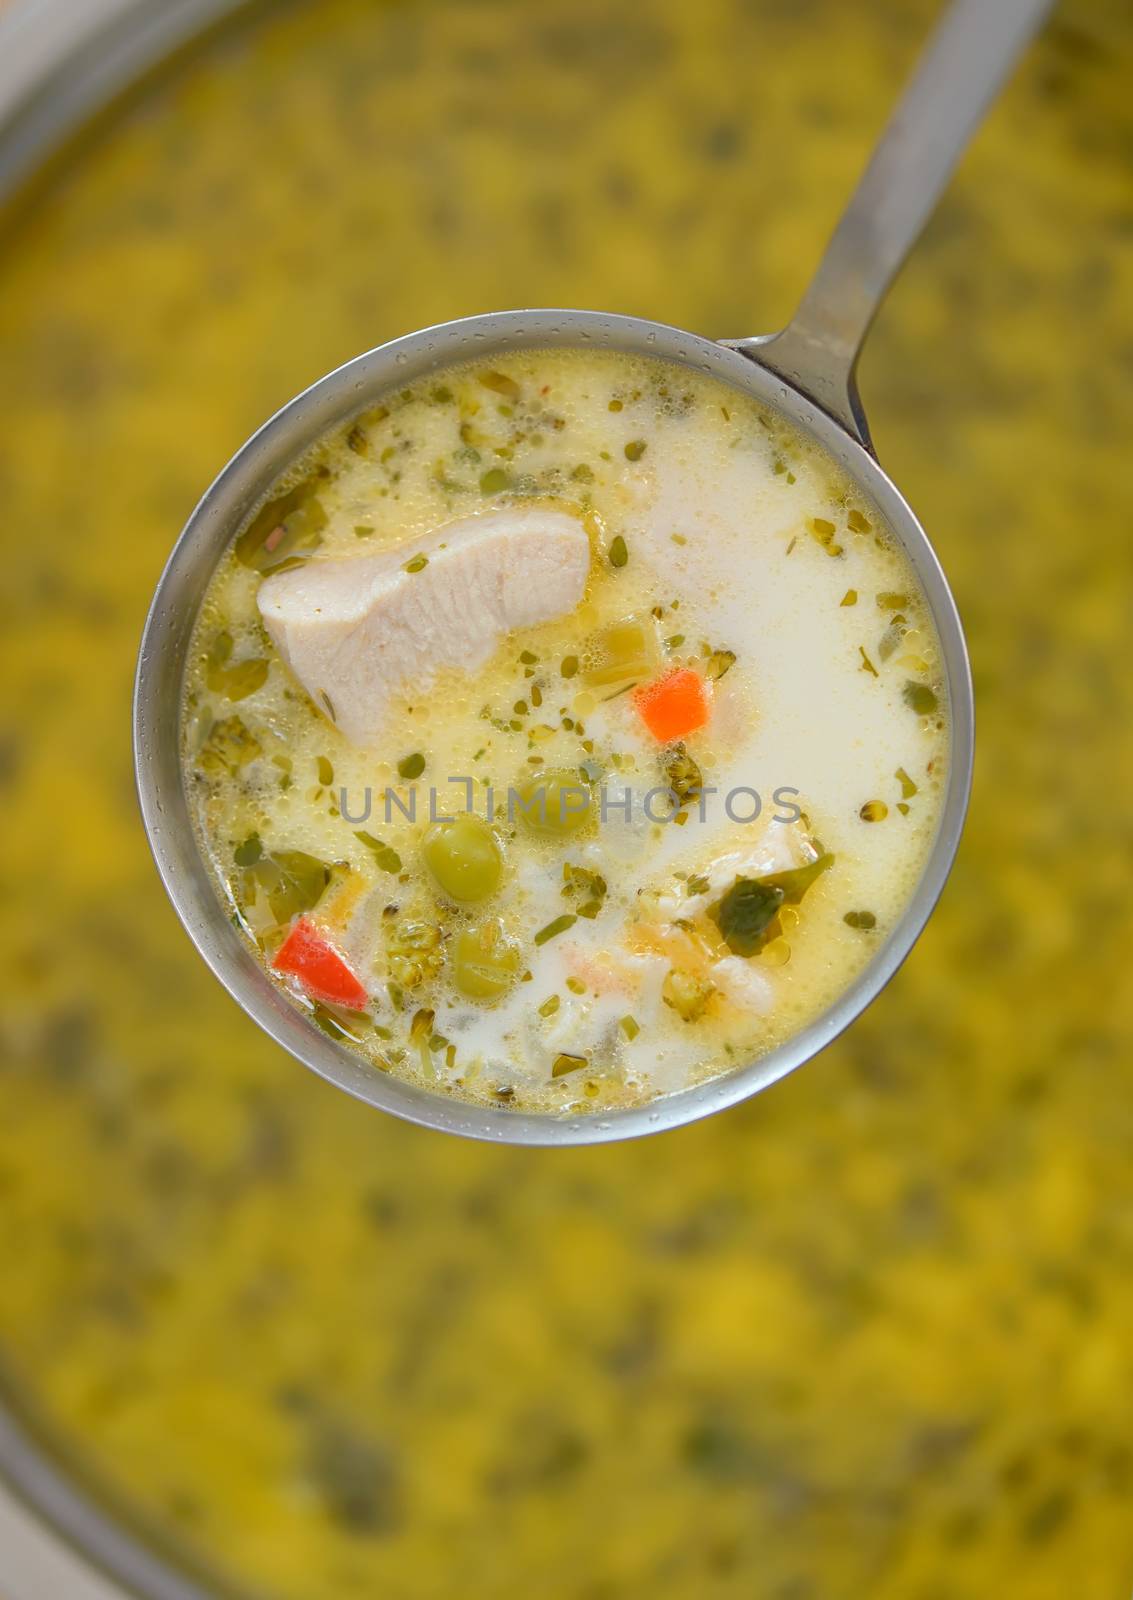 Chicken soup with vegetables and soup ladle